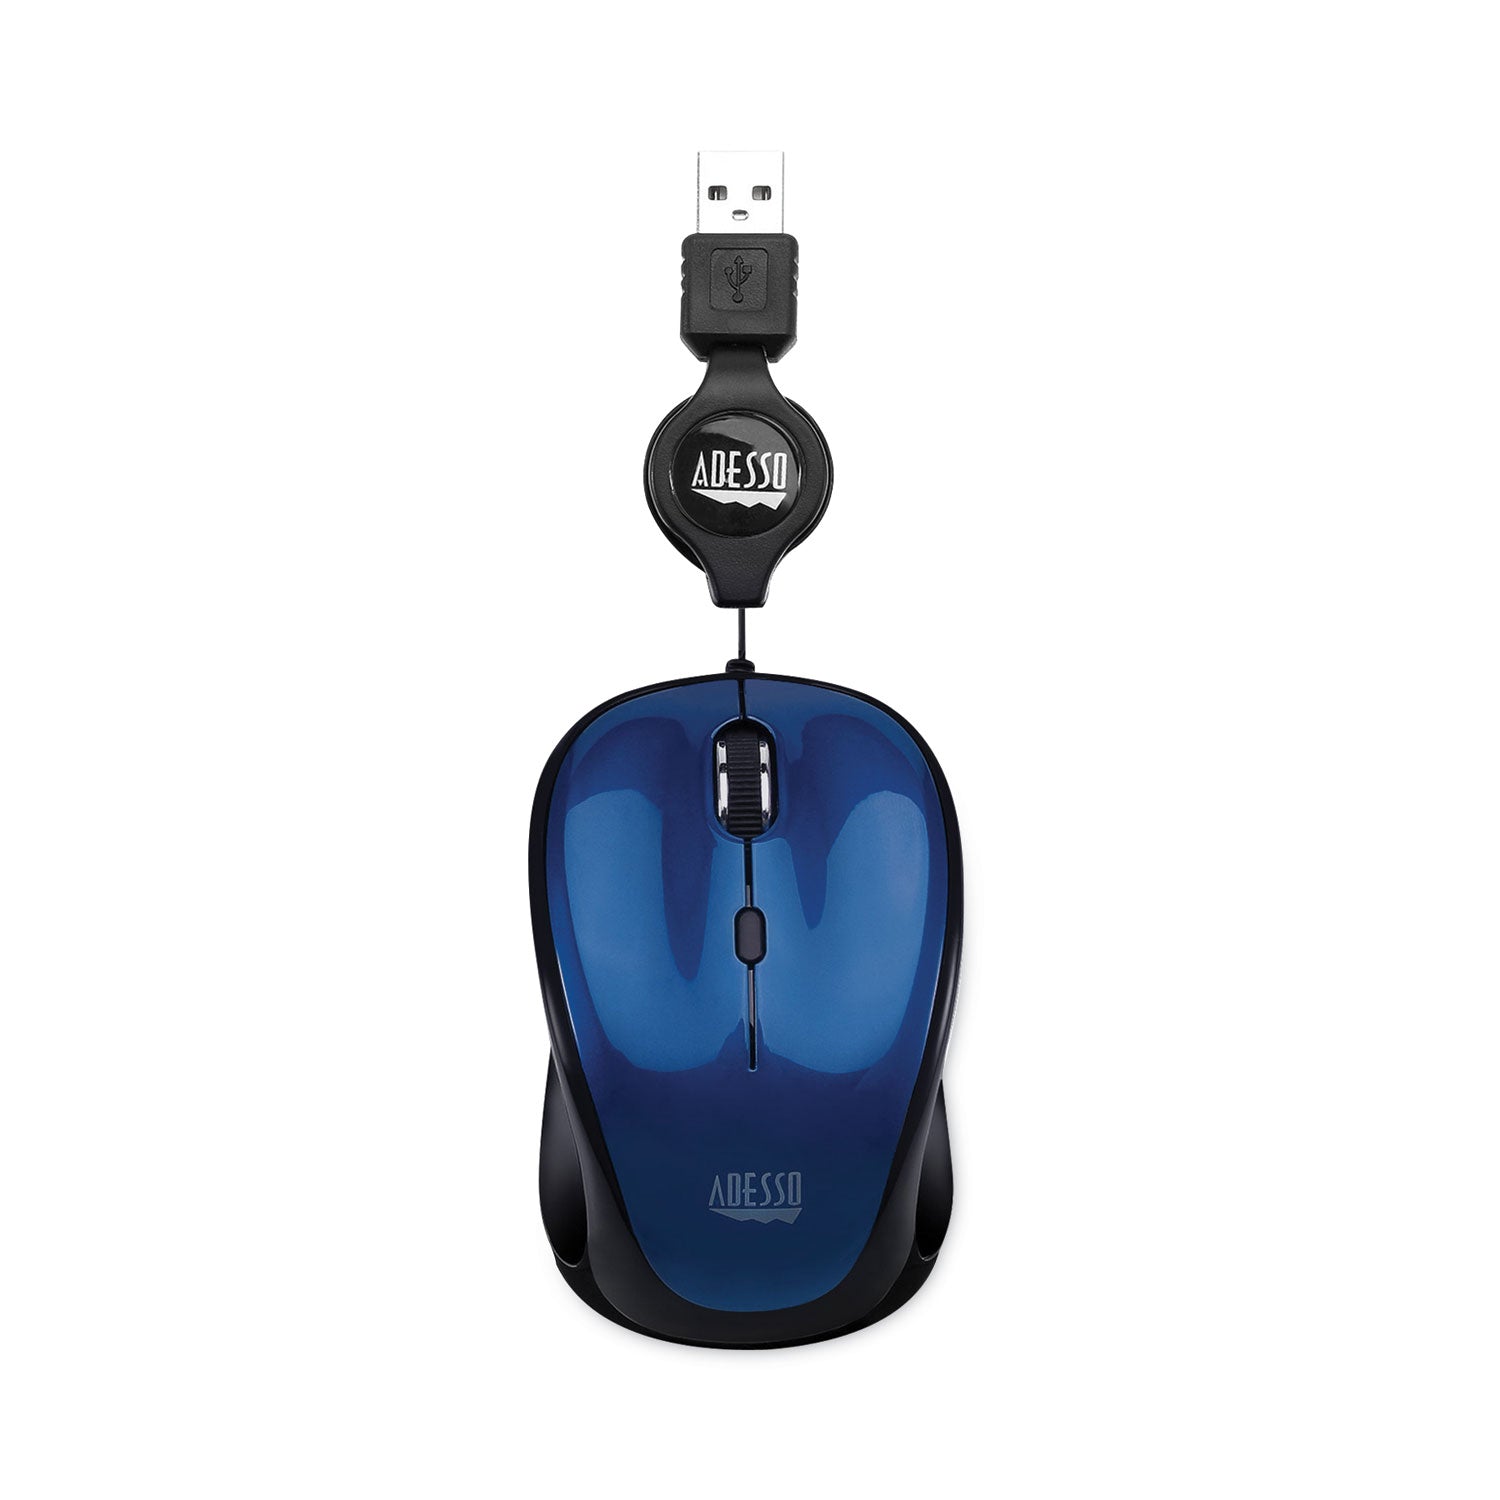 illuminated-retractable-mouse-usb-20-left-right-hand-use-dark-blue_adeimouses8l - 1